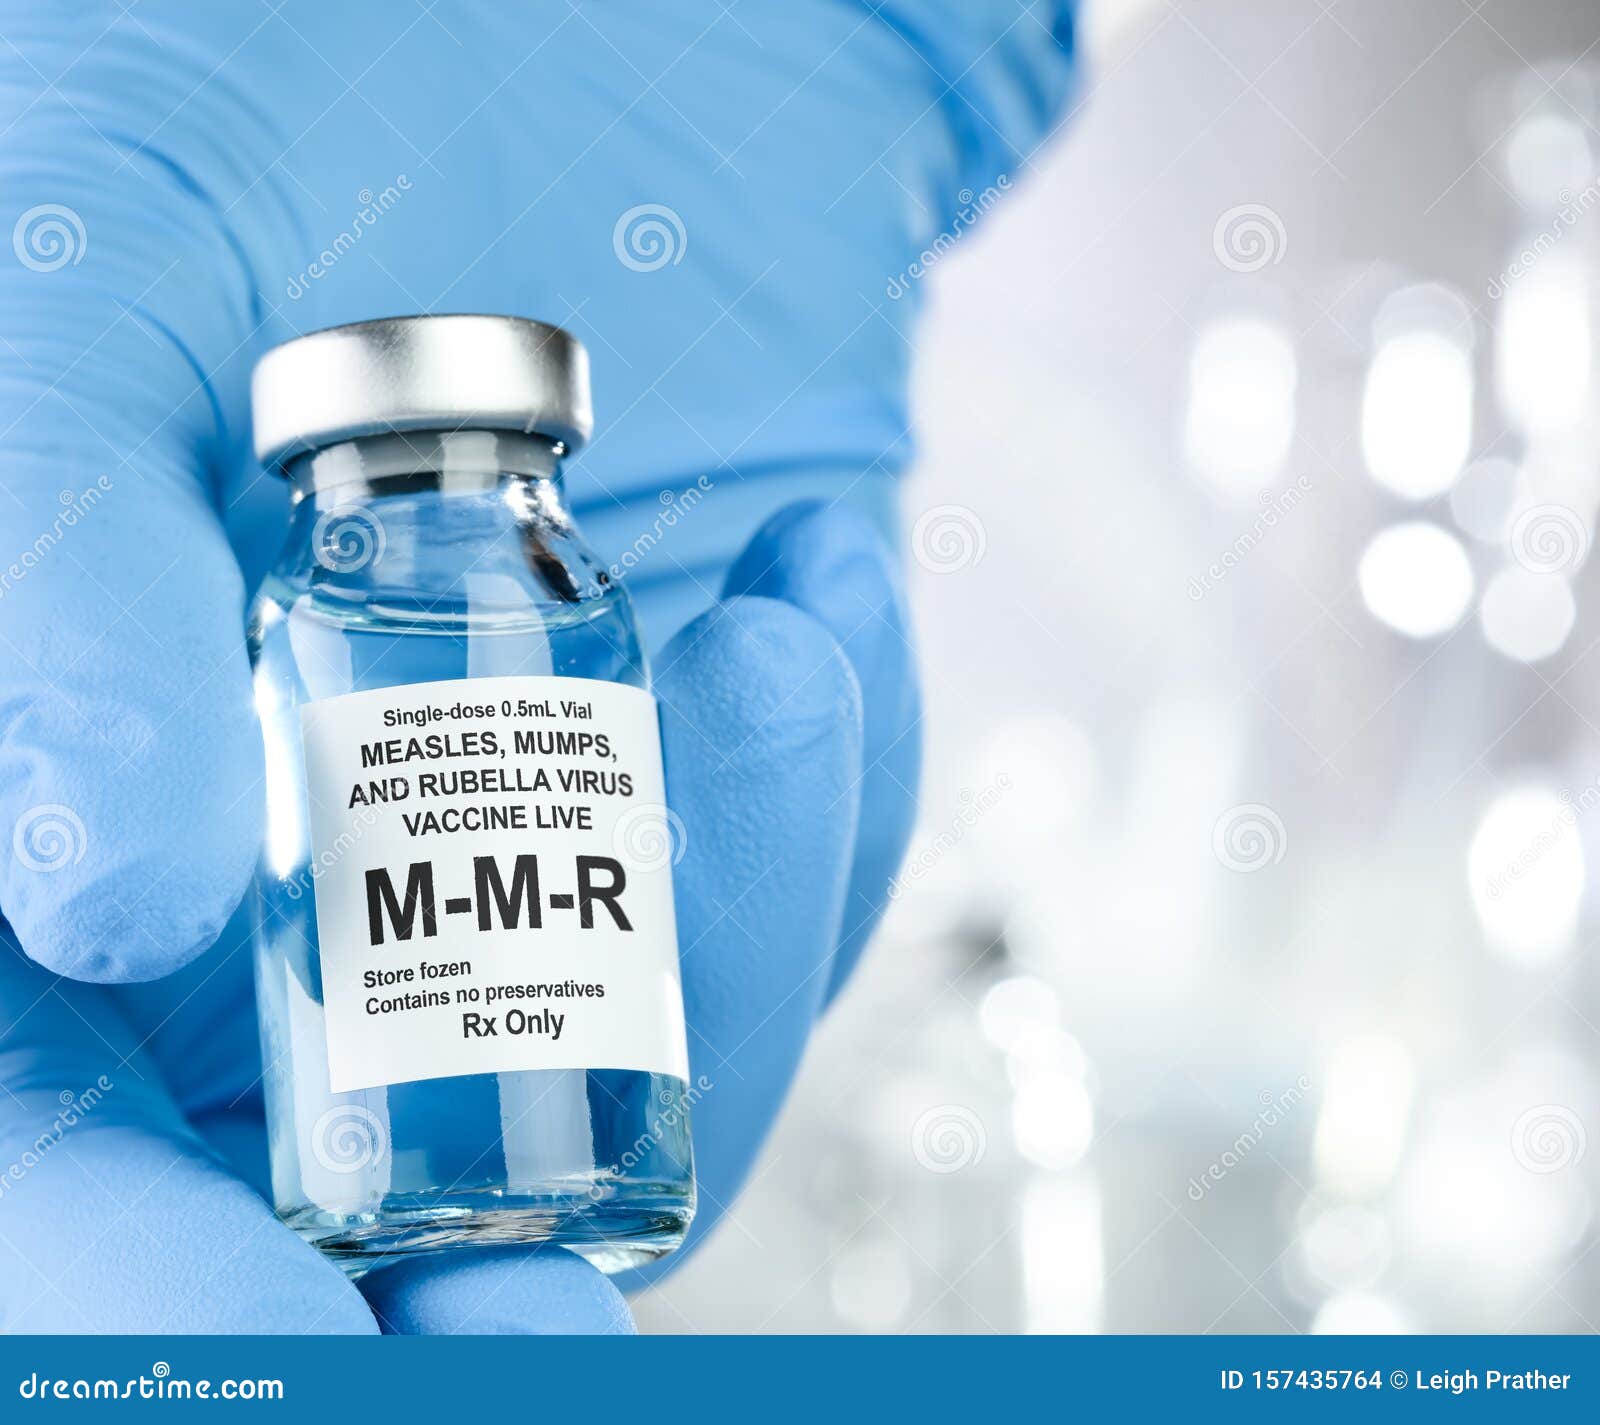 small drug vial with mmr vaccine